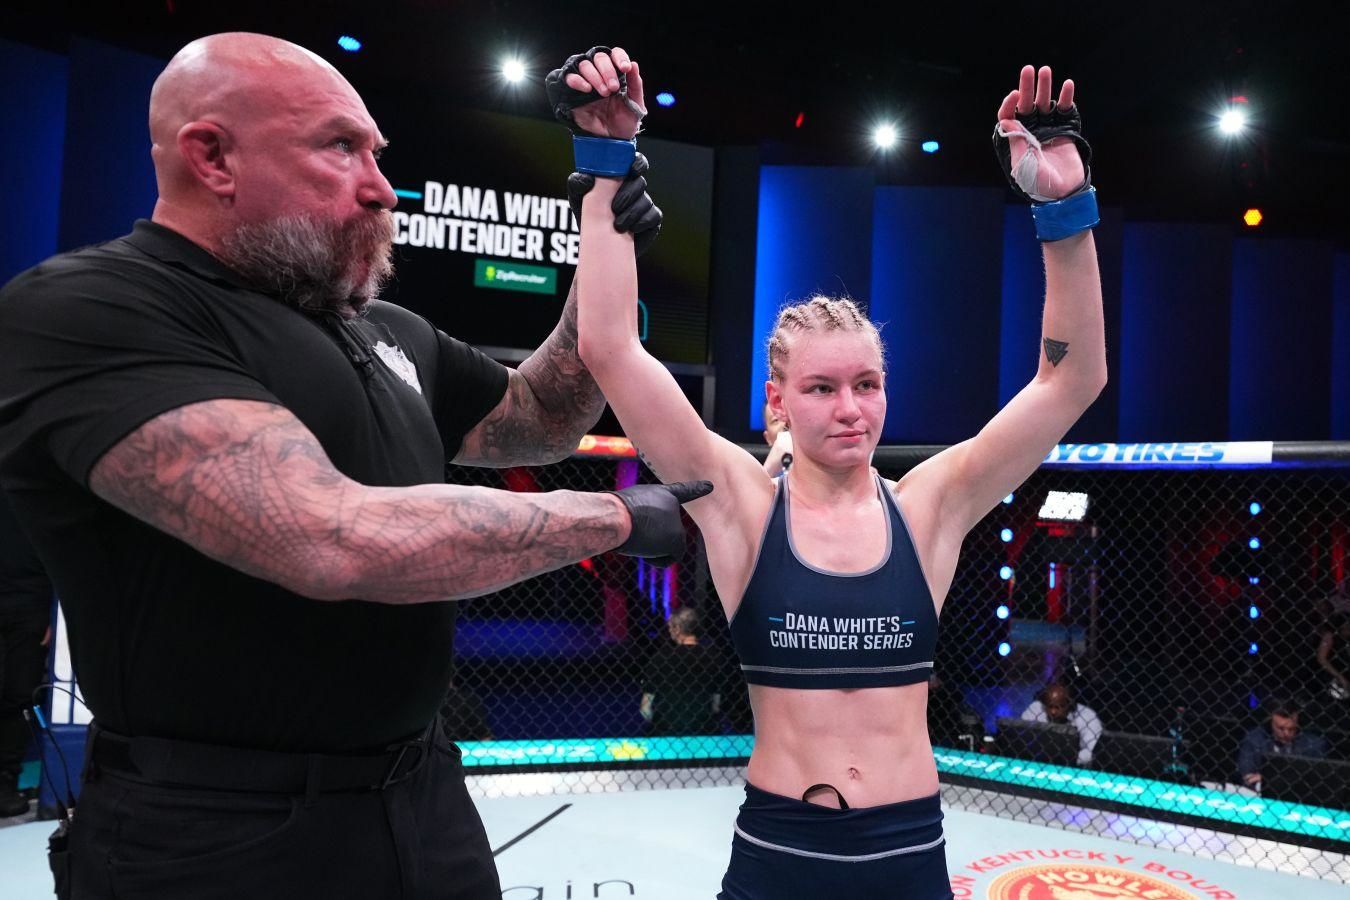 &quot;I came to the gym even when my jaw was broken.&quot; An interview with a new UFC fighter Victoria Dudakova